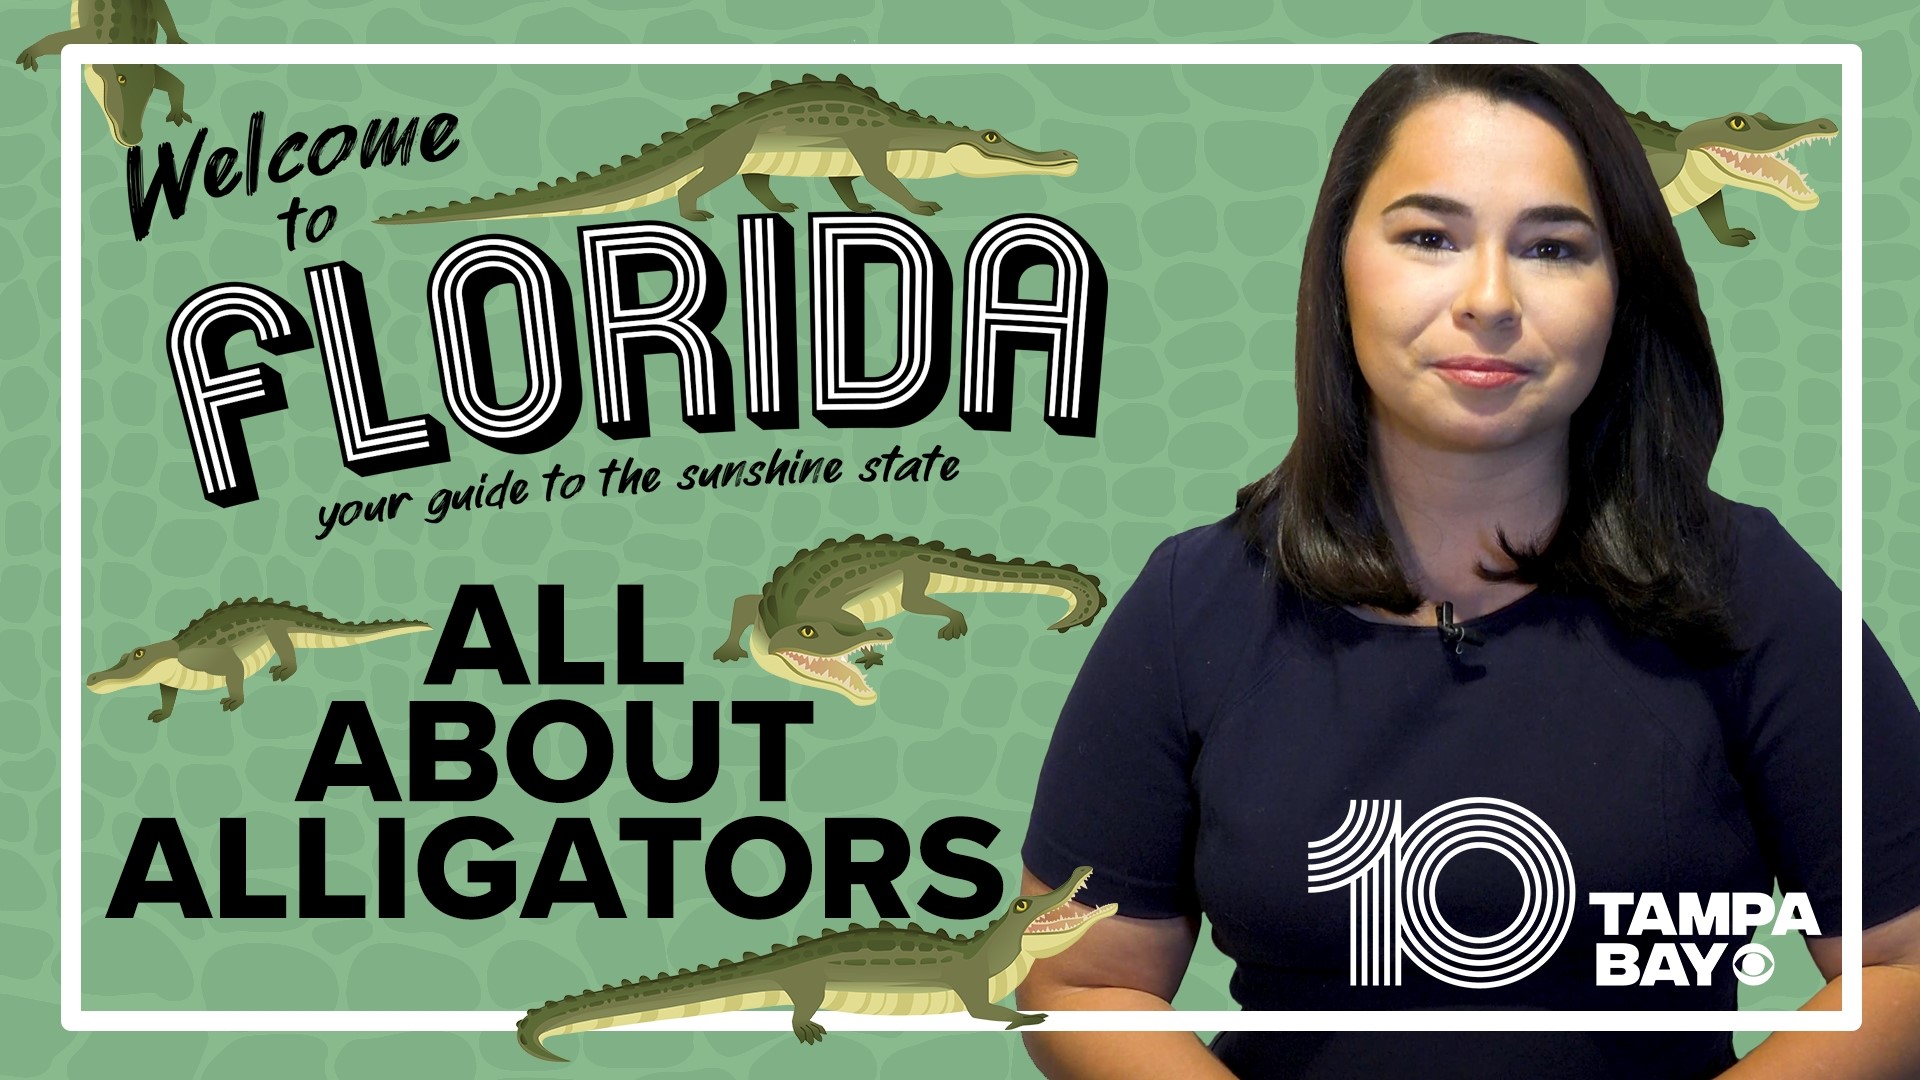 Alligators are key members of Florida’s ecosystem with 1.3 million living in the state.